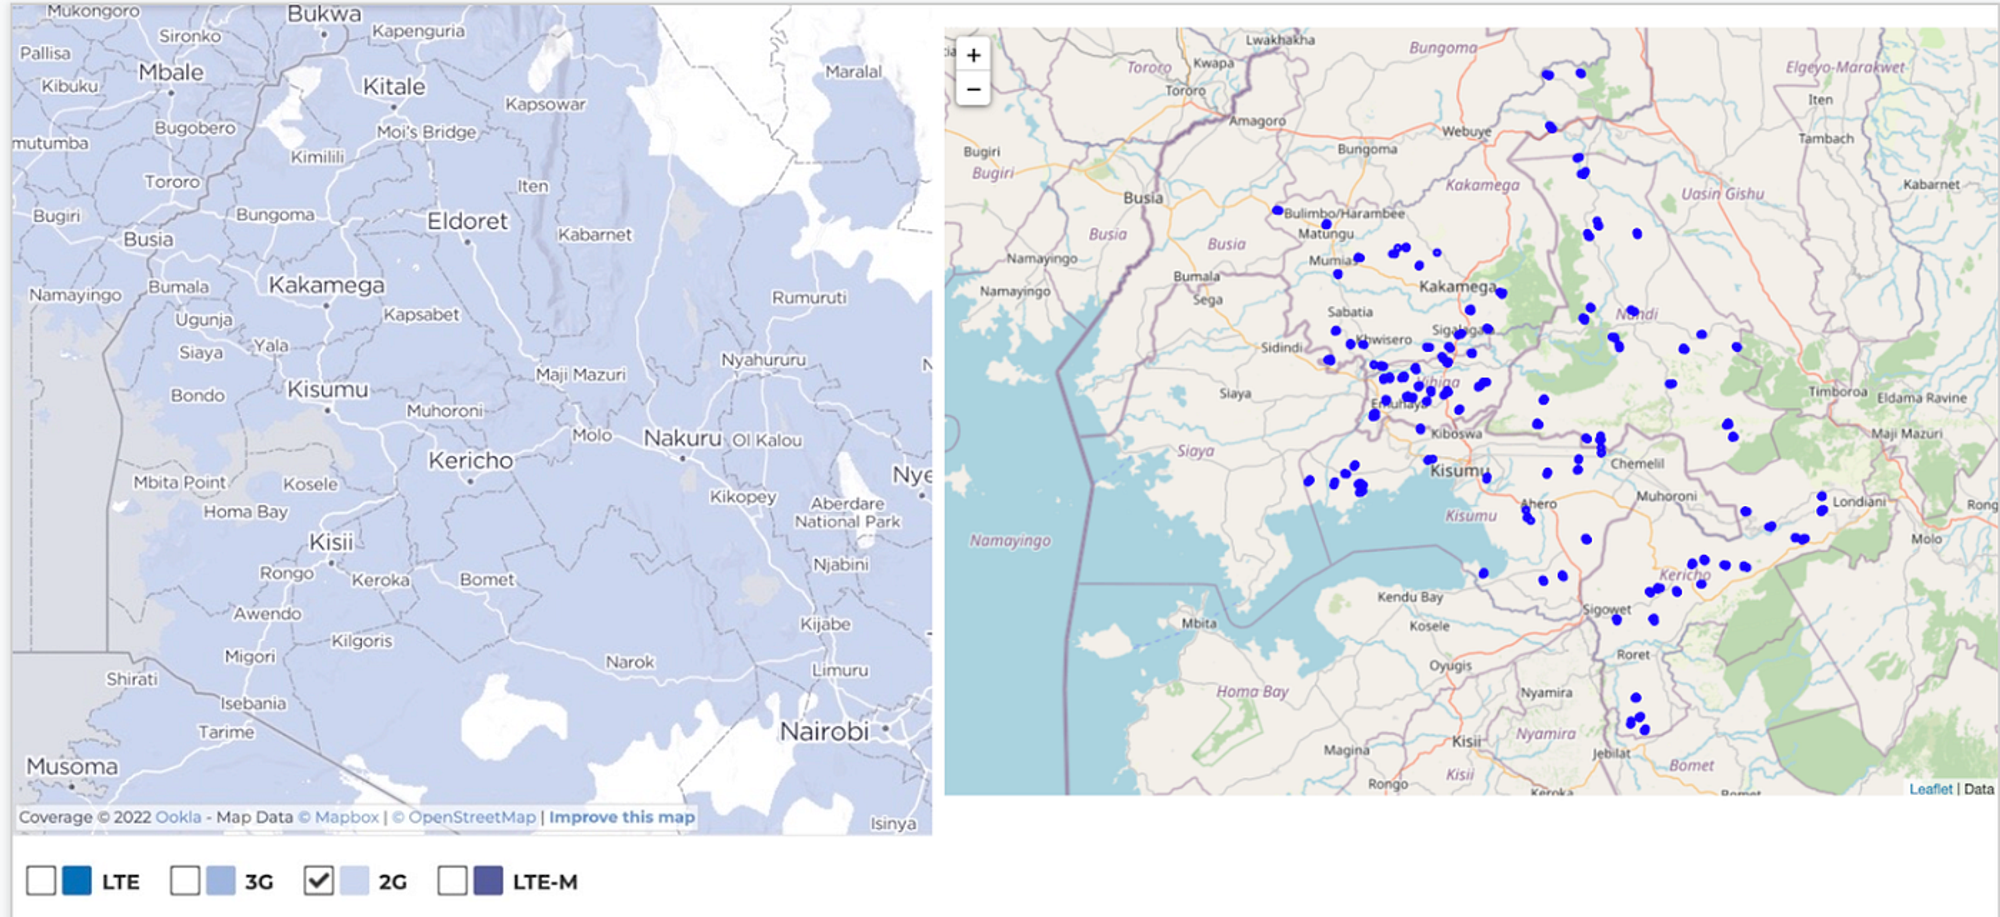 Figure 2: [Left]: Aeris map showing 2G cellular coverage in the five study counties in Kenya (Kakamega, Kericho, Kisumu, Nandi, and Vihiga). The map shows wide coverage, yet it was important to test the level of cellular coverage of this region to ascertain the likelihood of data collection success. [Right]: map showing the locations where the sensors were deployed in Kenya.